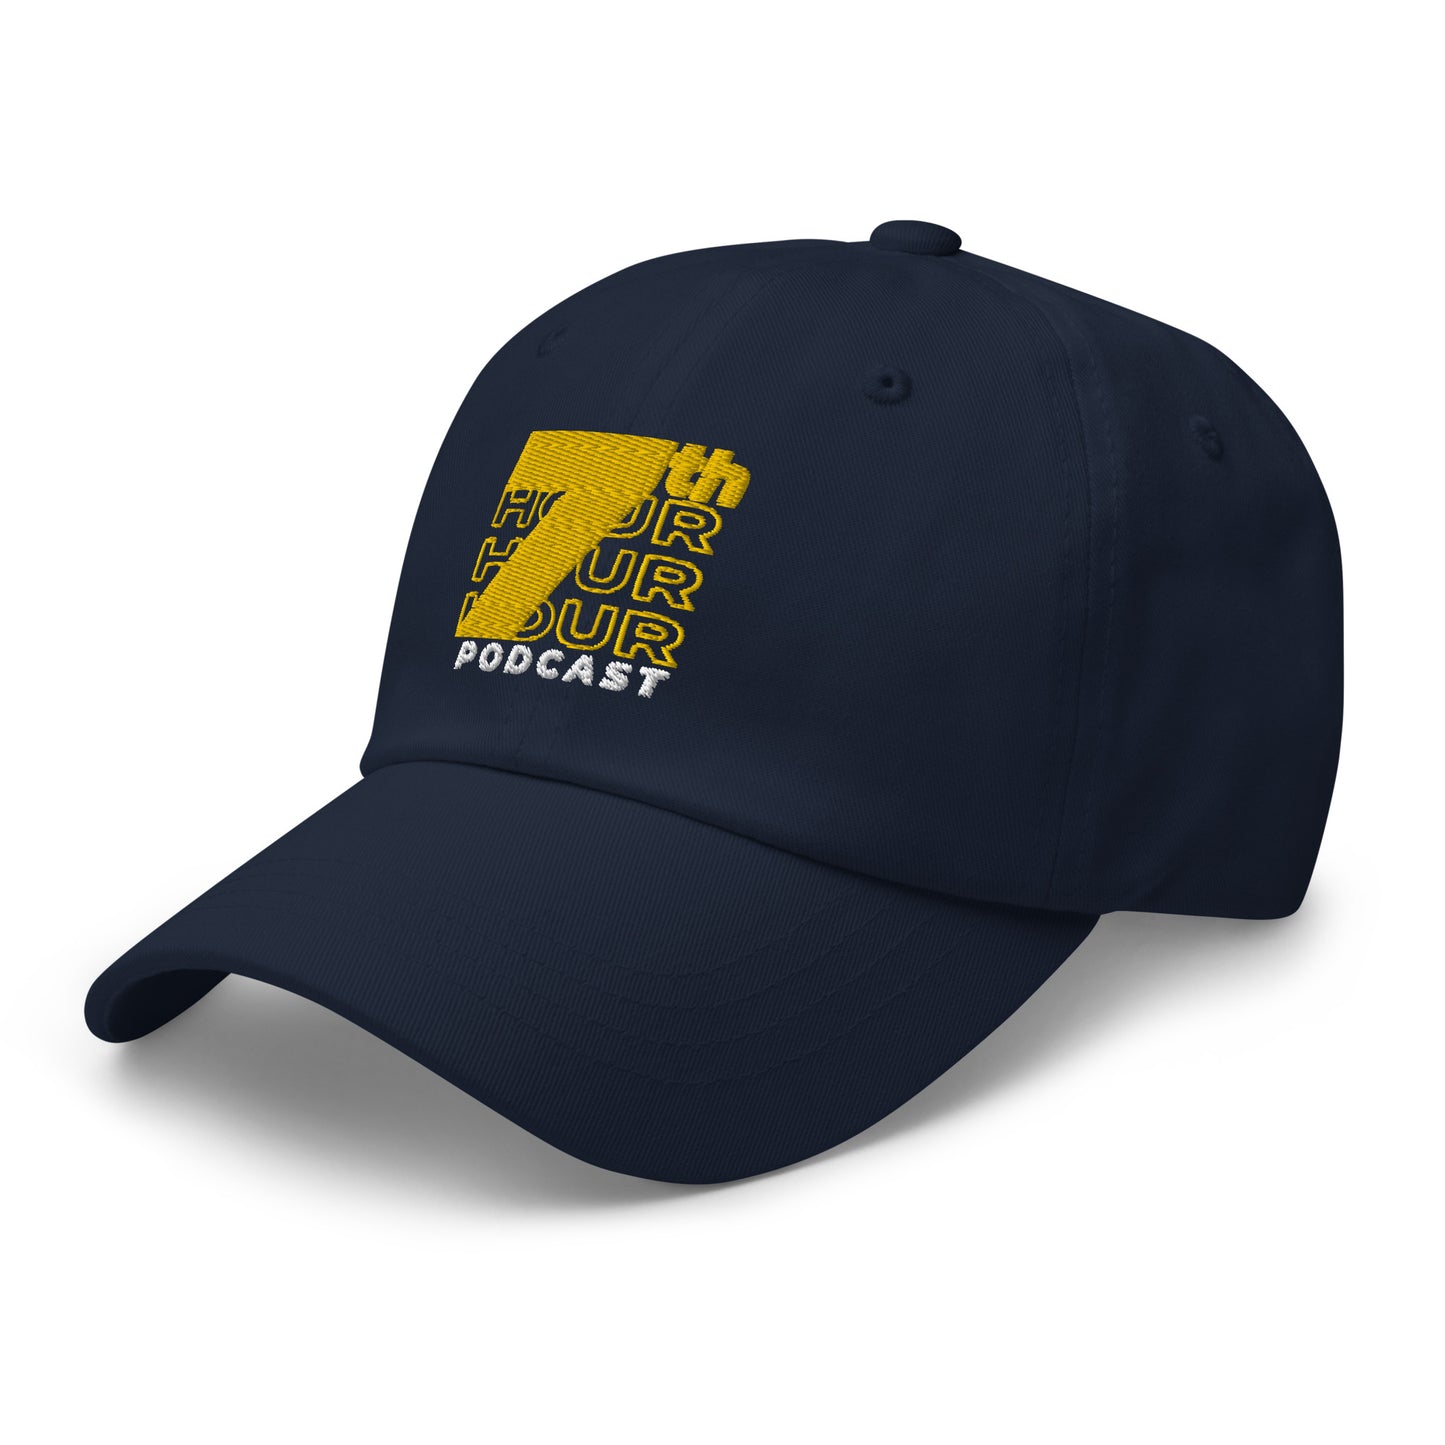 7th Hour Podcast - Embroidered Dad hat